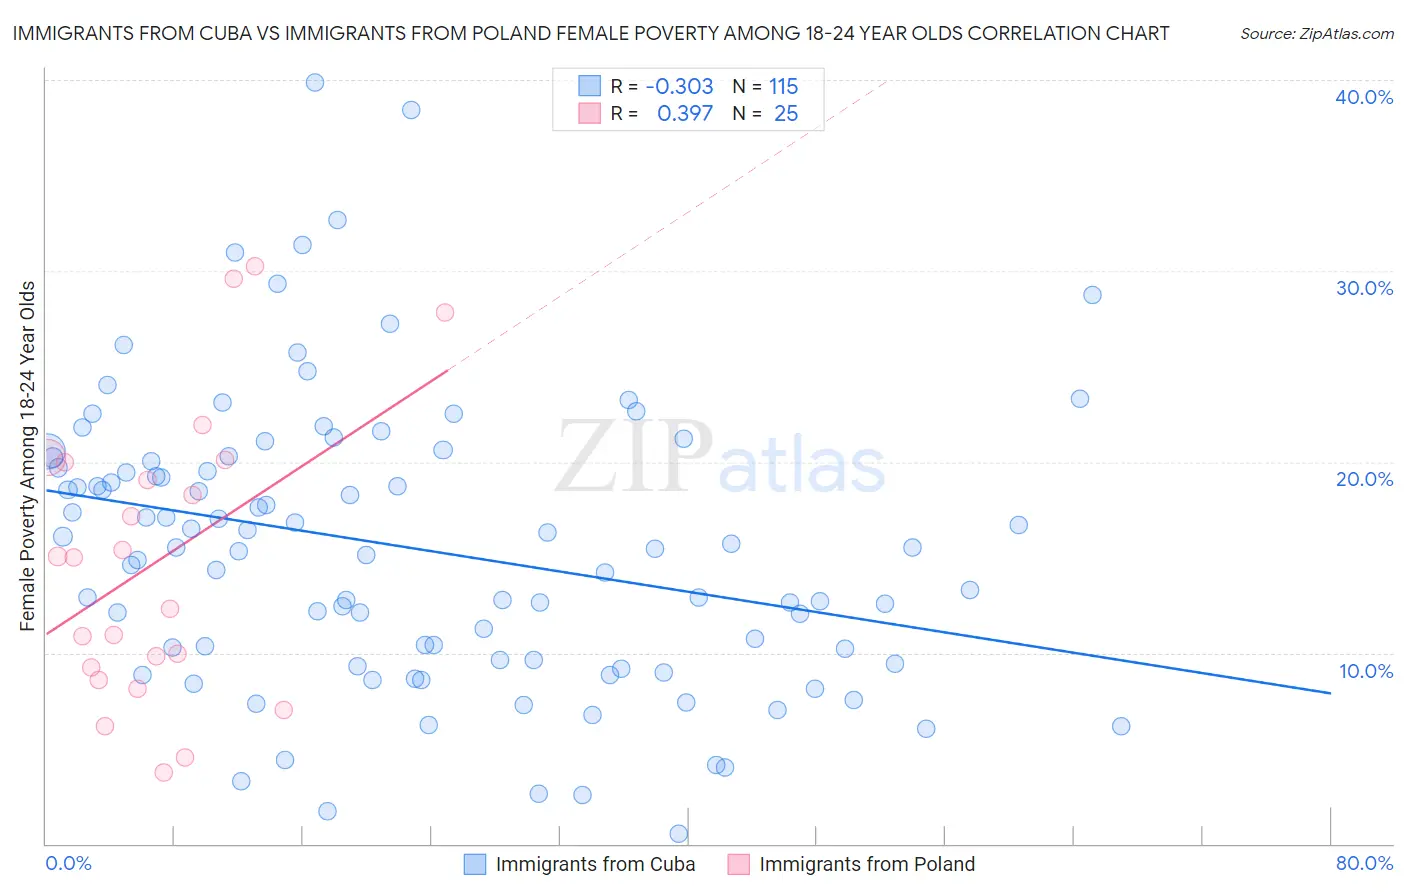 Immigrants from Cuba vs Immigrants from Poland Female Poverty Among 18-24 Year Olds